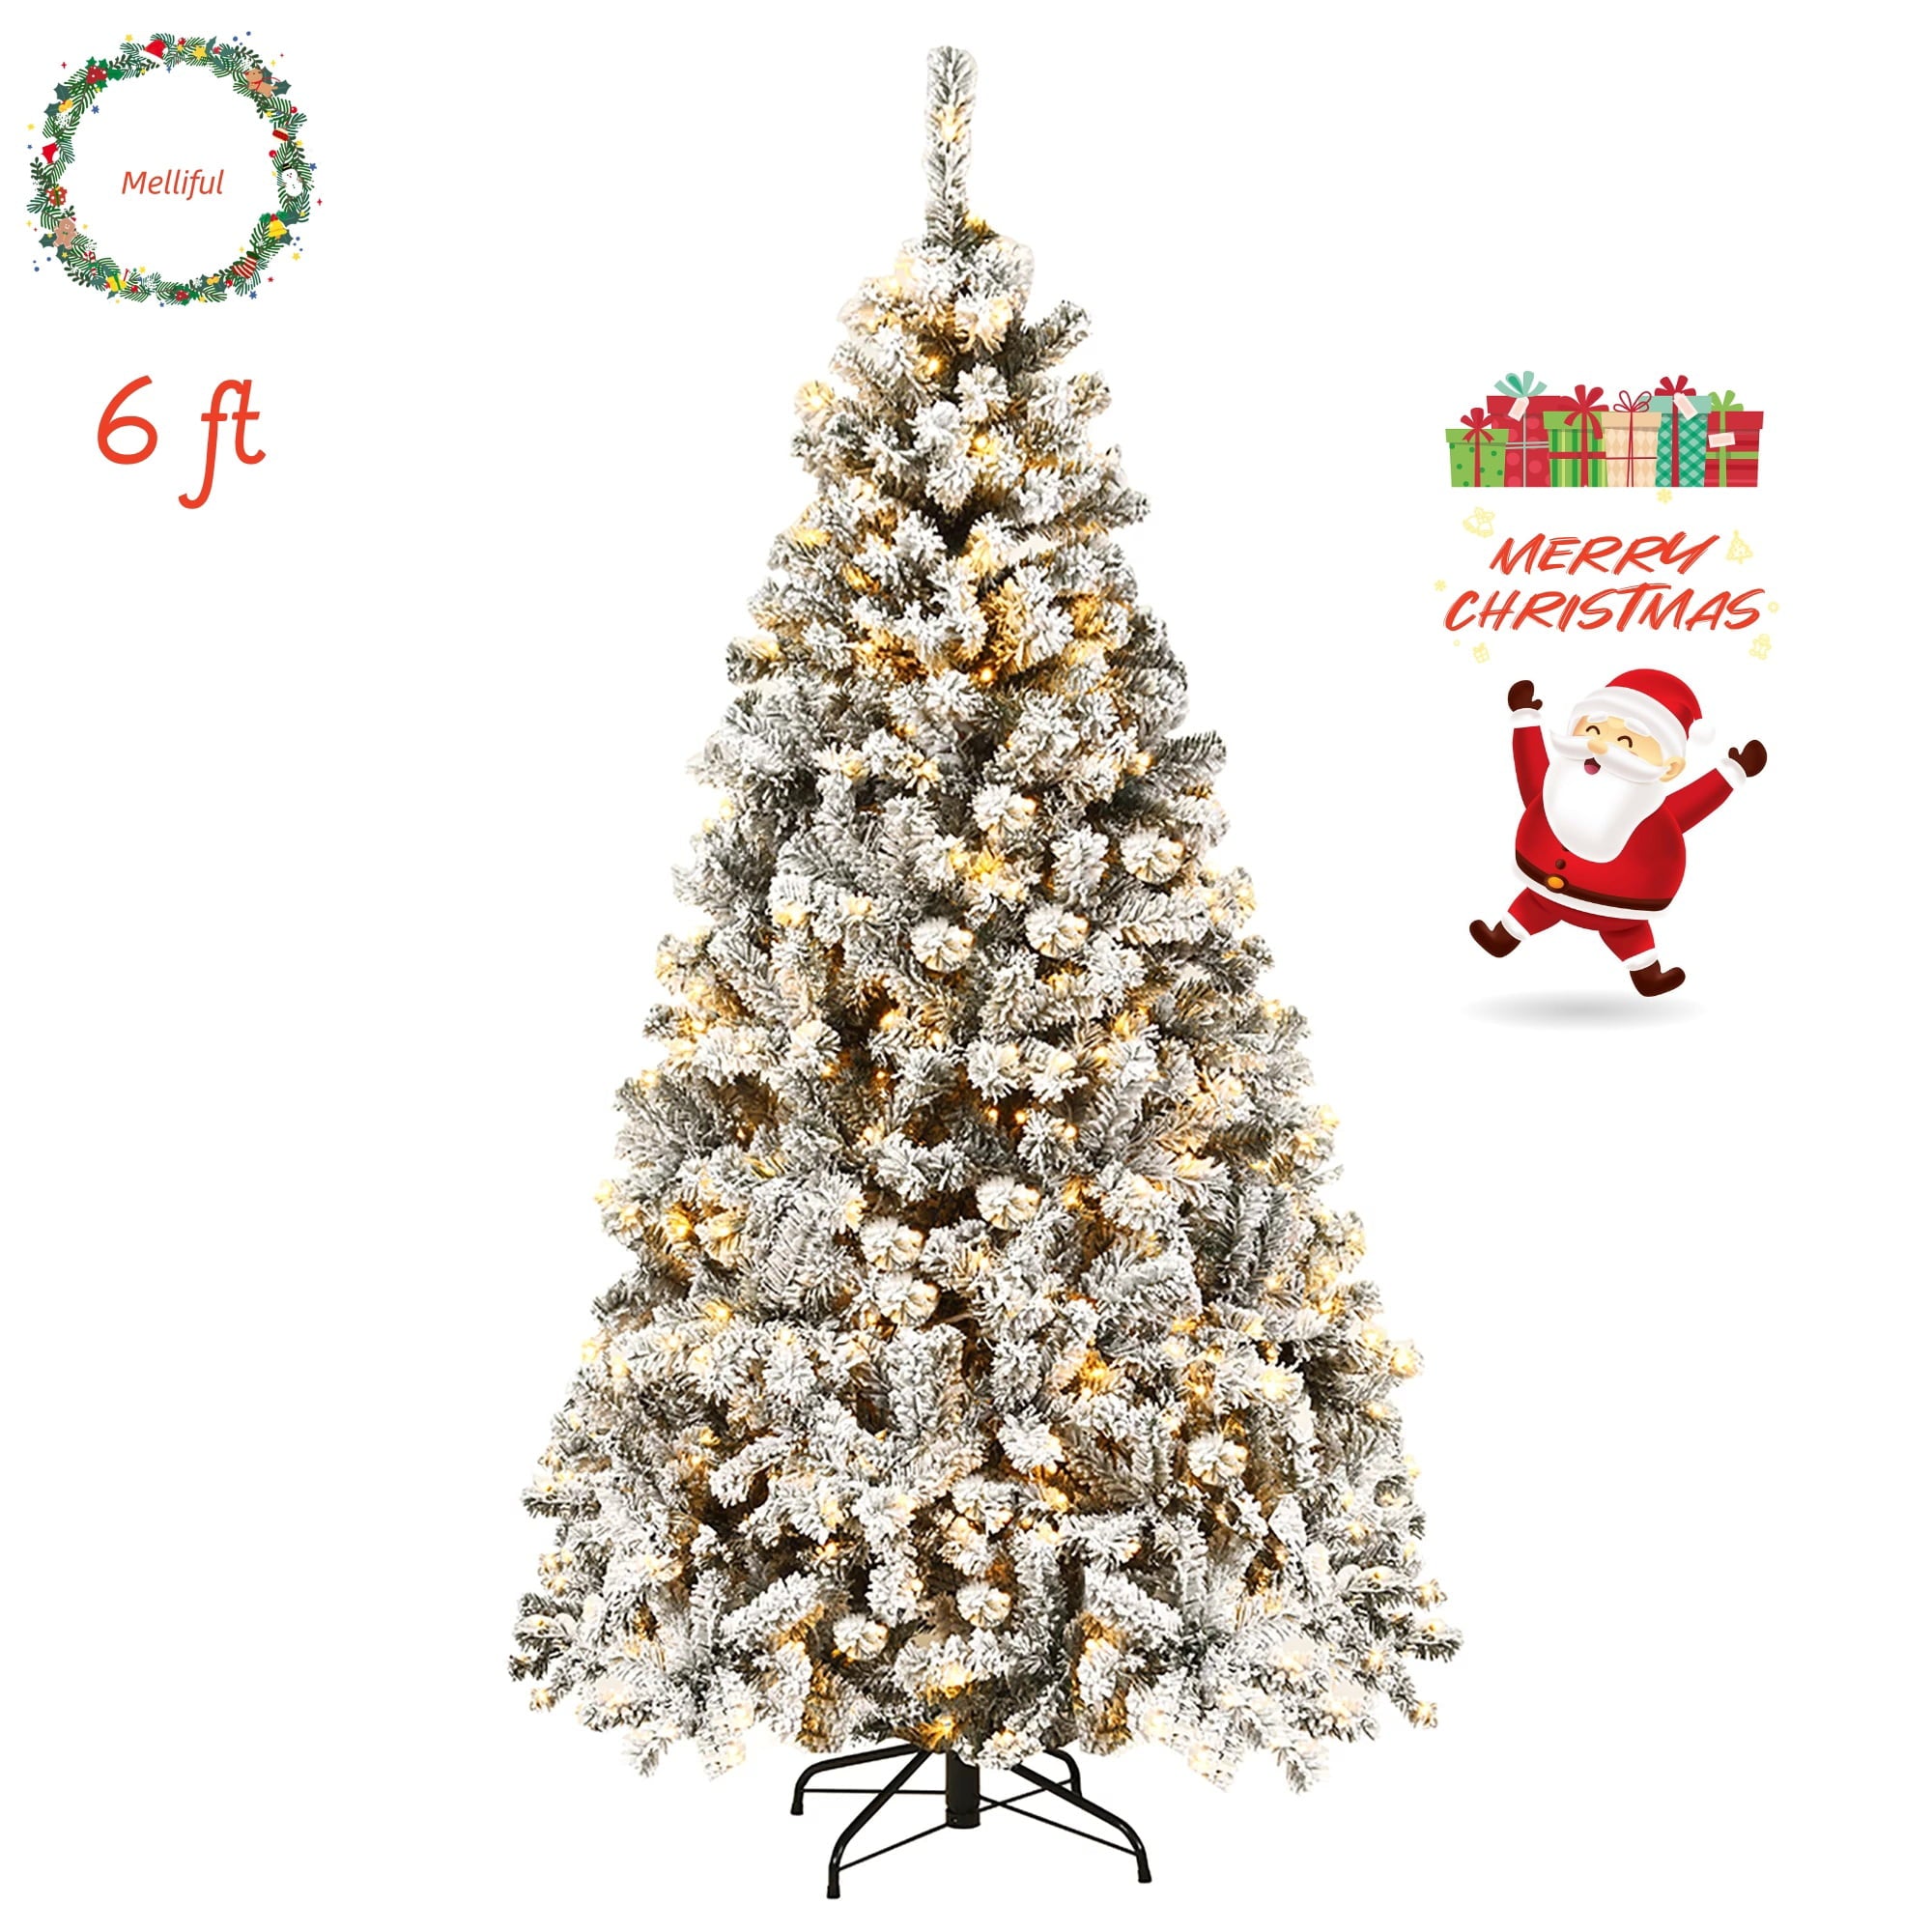 Melliful 6 ft Pre-Lit Snow Flocked Christmas Tree, Artificial Snowy Pine Tree with 100 LED Lights & Sturdy Metal Base, Ideal for Home Office Party Xmas Holiday Decorations